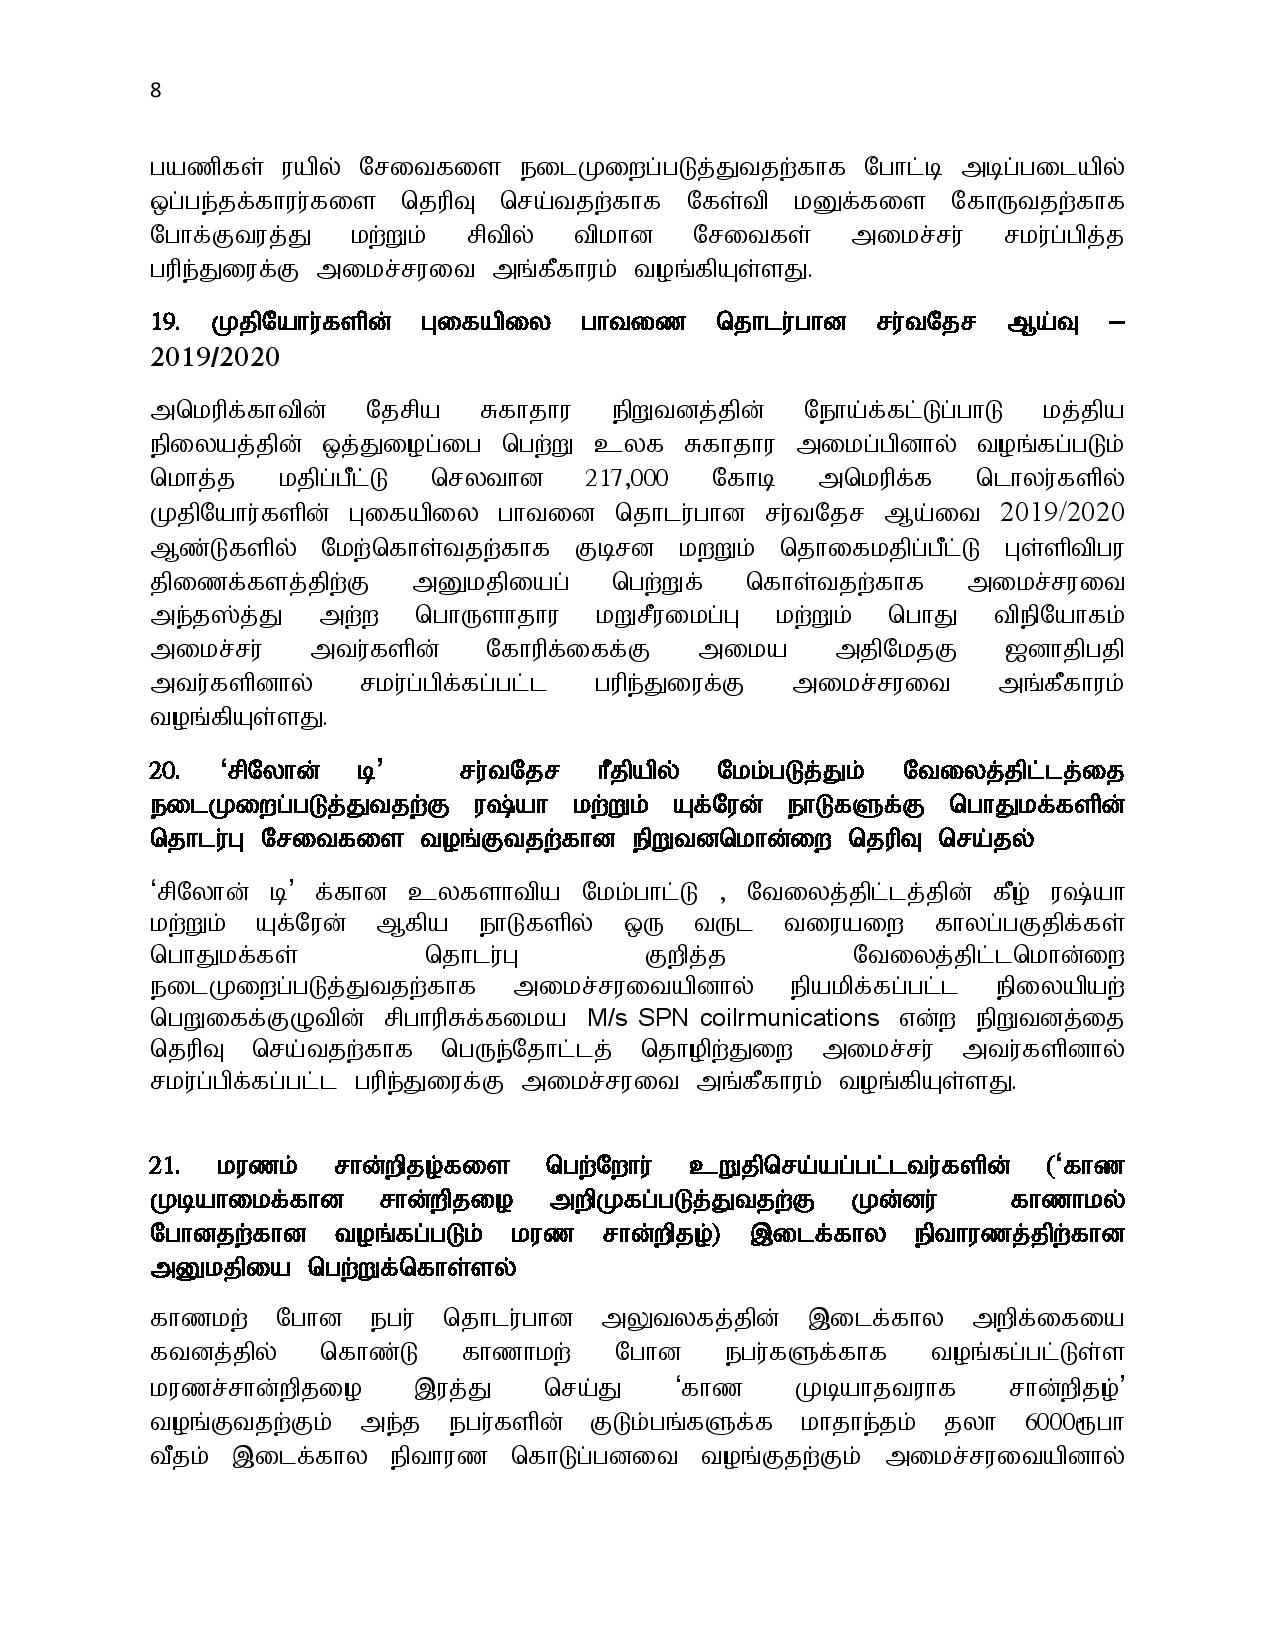 29.10.2019 cabinet tamil page 008